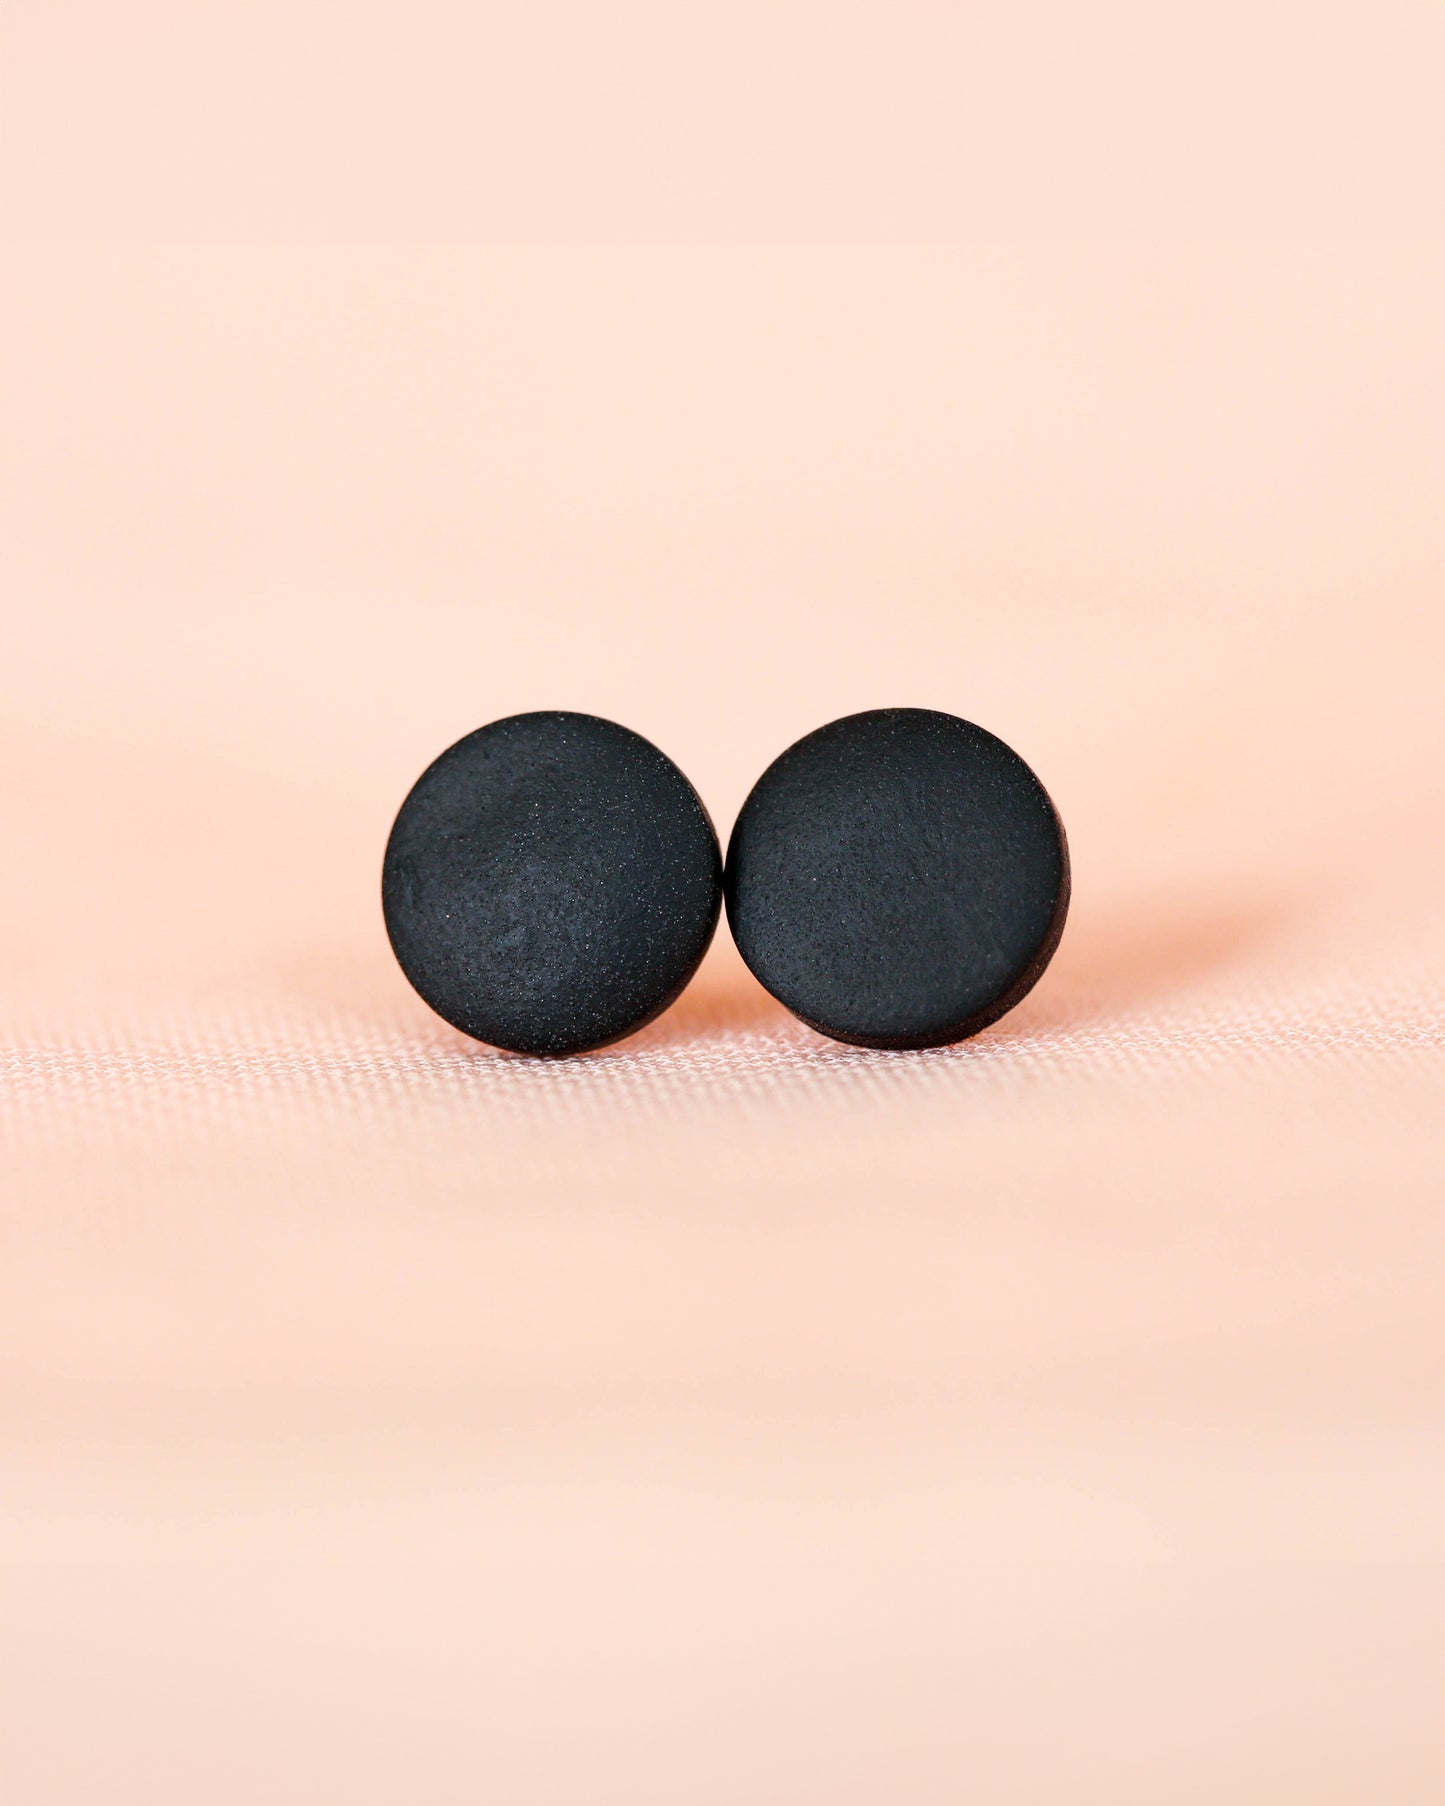 Black stud earrings perfect for those with sensitive skin